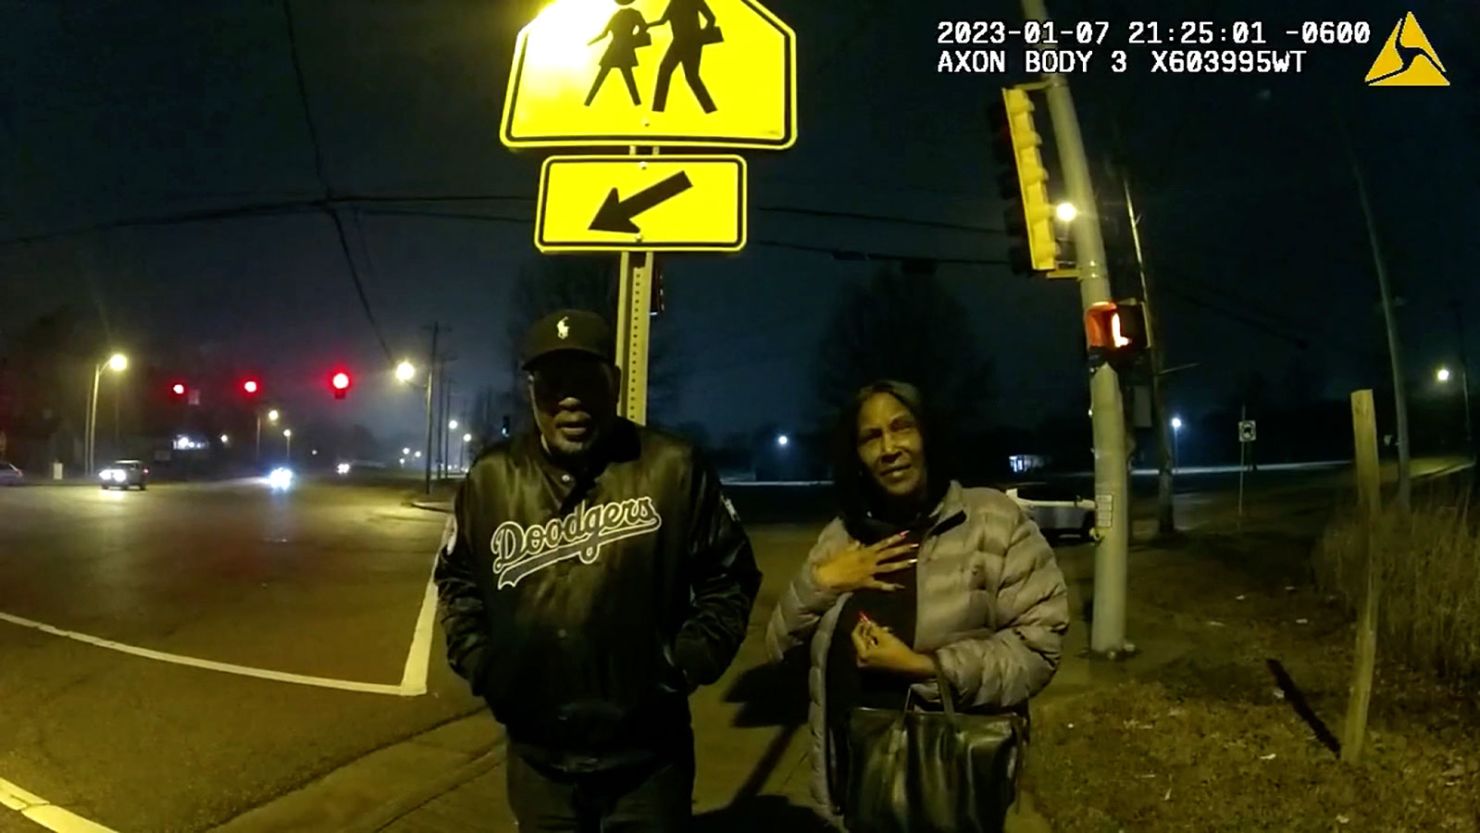 New video released from the Tyre Nichols investigation shows officers interacting with Nichols’ mother, RowVaughn Wells. on January 7, 2023, the night he was beaten by police. Nichols would die three days later from his injuries.